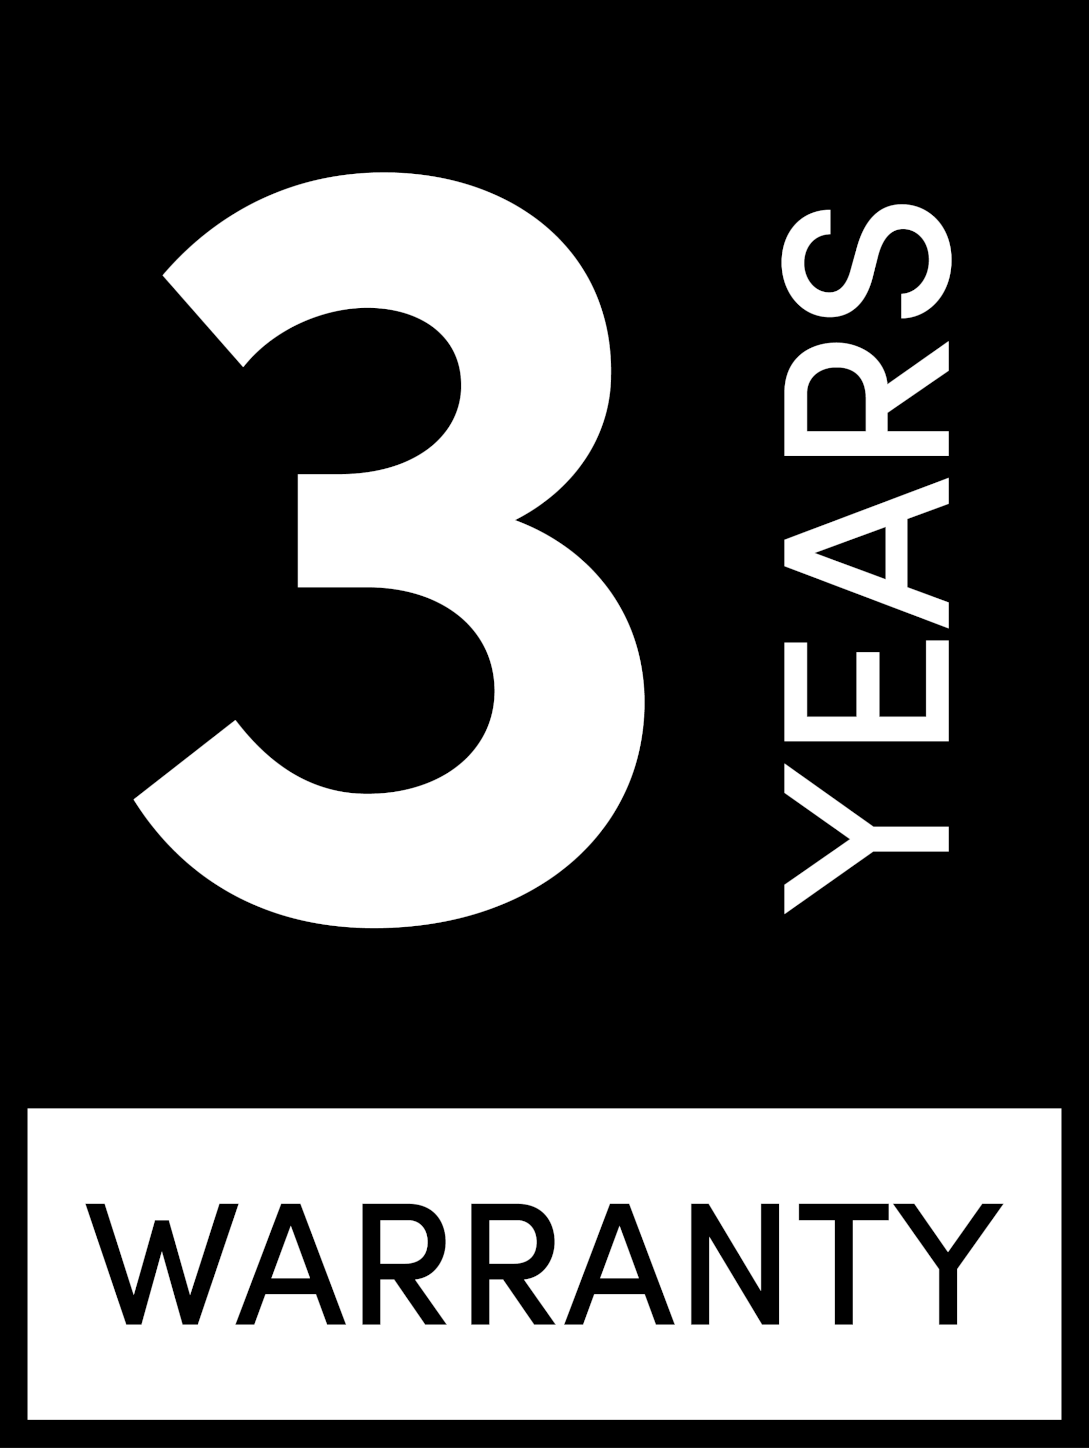 Industry leading 3 year warranty on all Gaming PCs